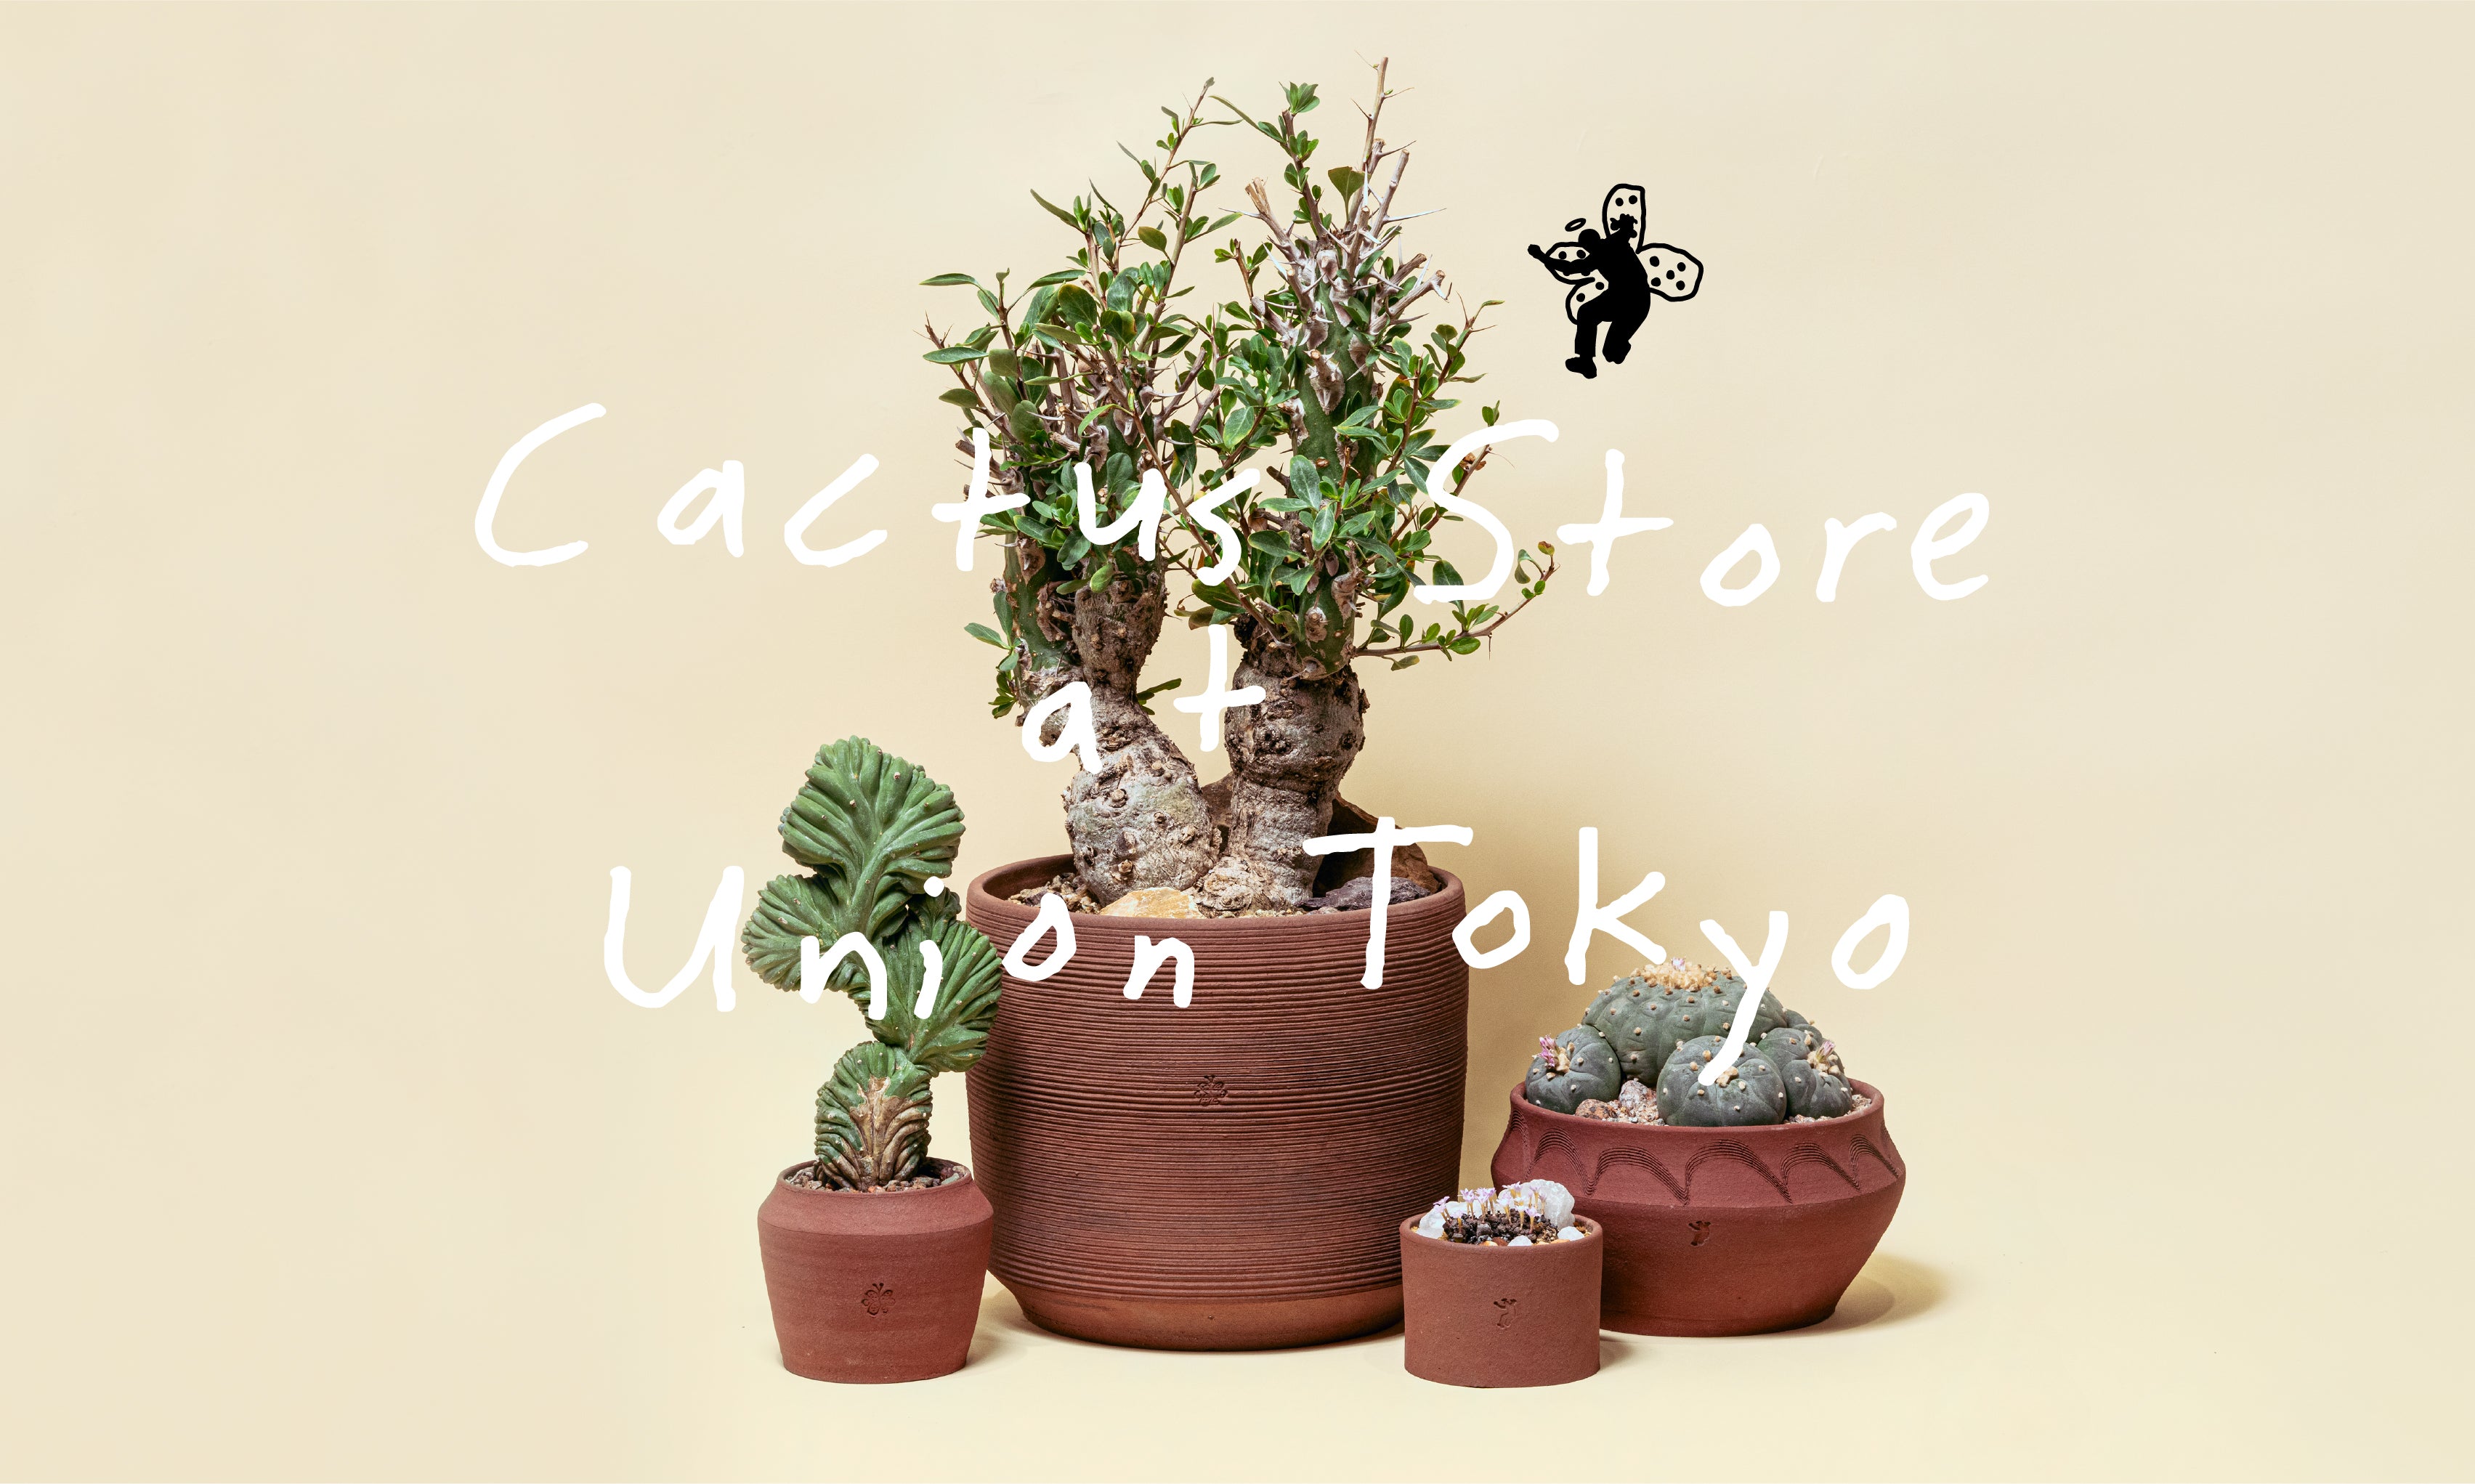 CACTUS STORE at UNION TOKYO supported by KAKUSEN-EN